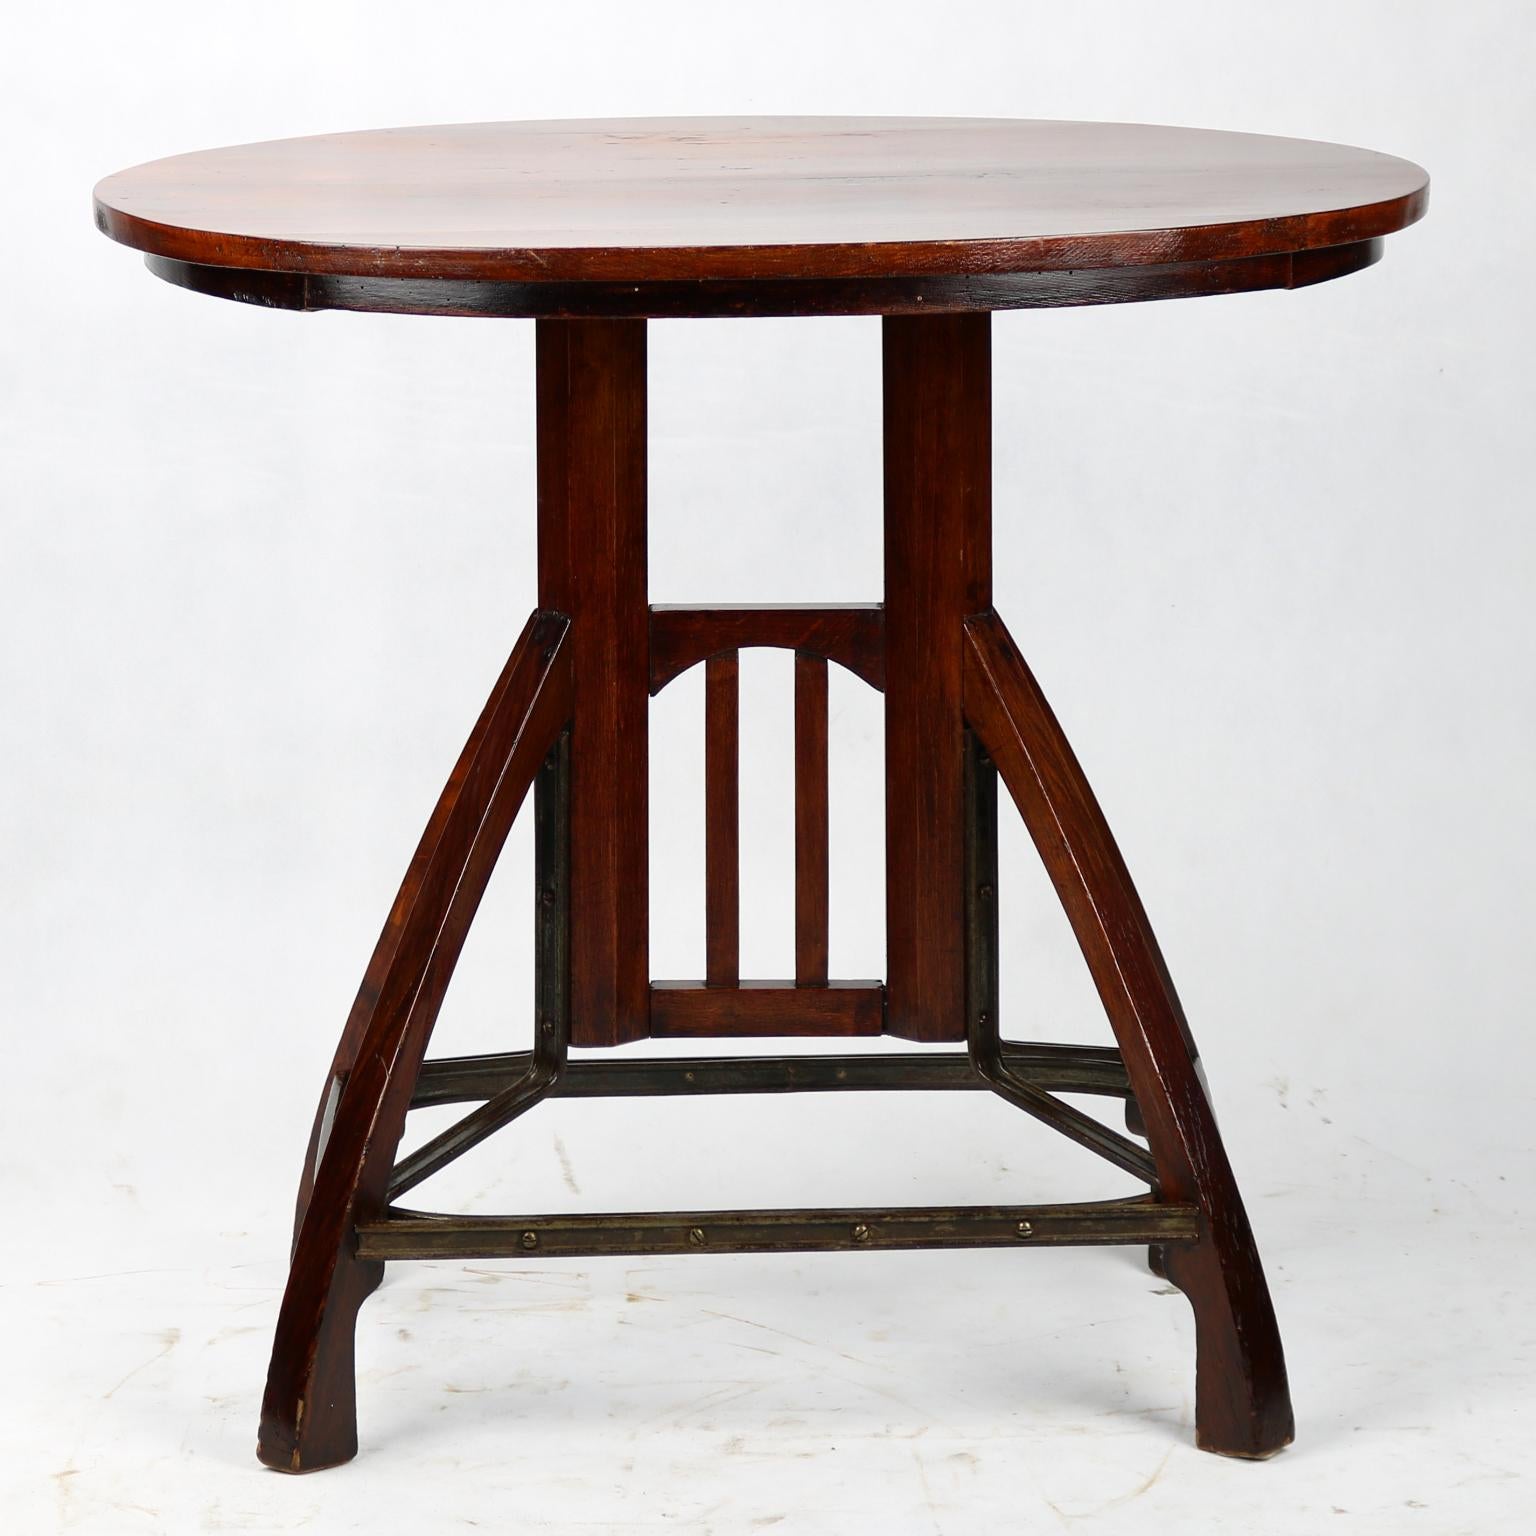 Art nouveau beechwood side table, originally made to order by manufacture in Budapest, circa 1900.